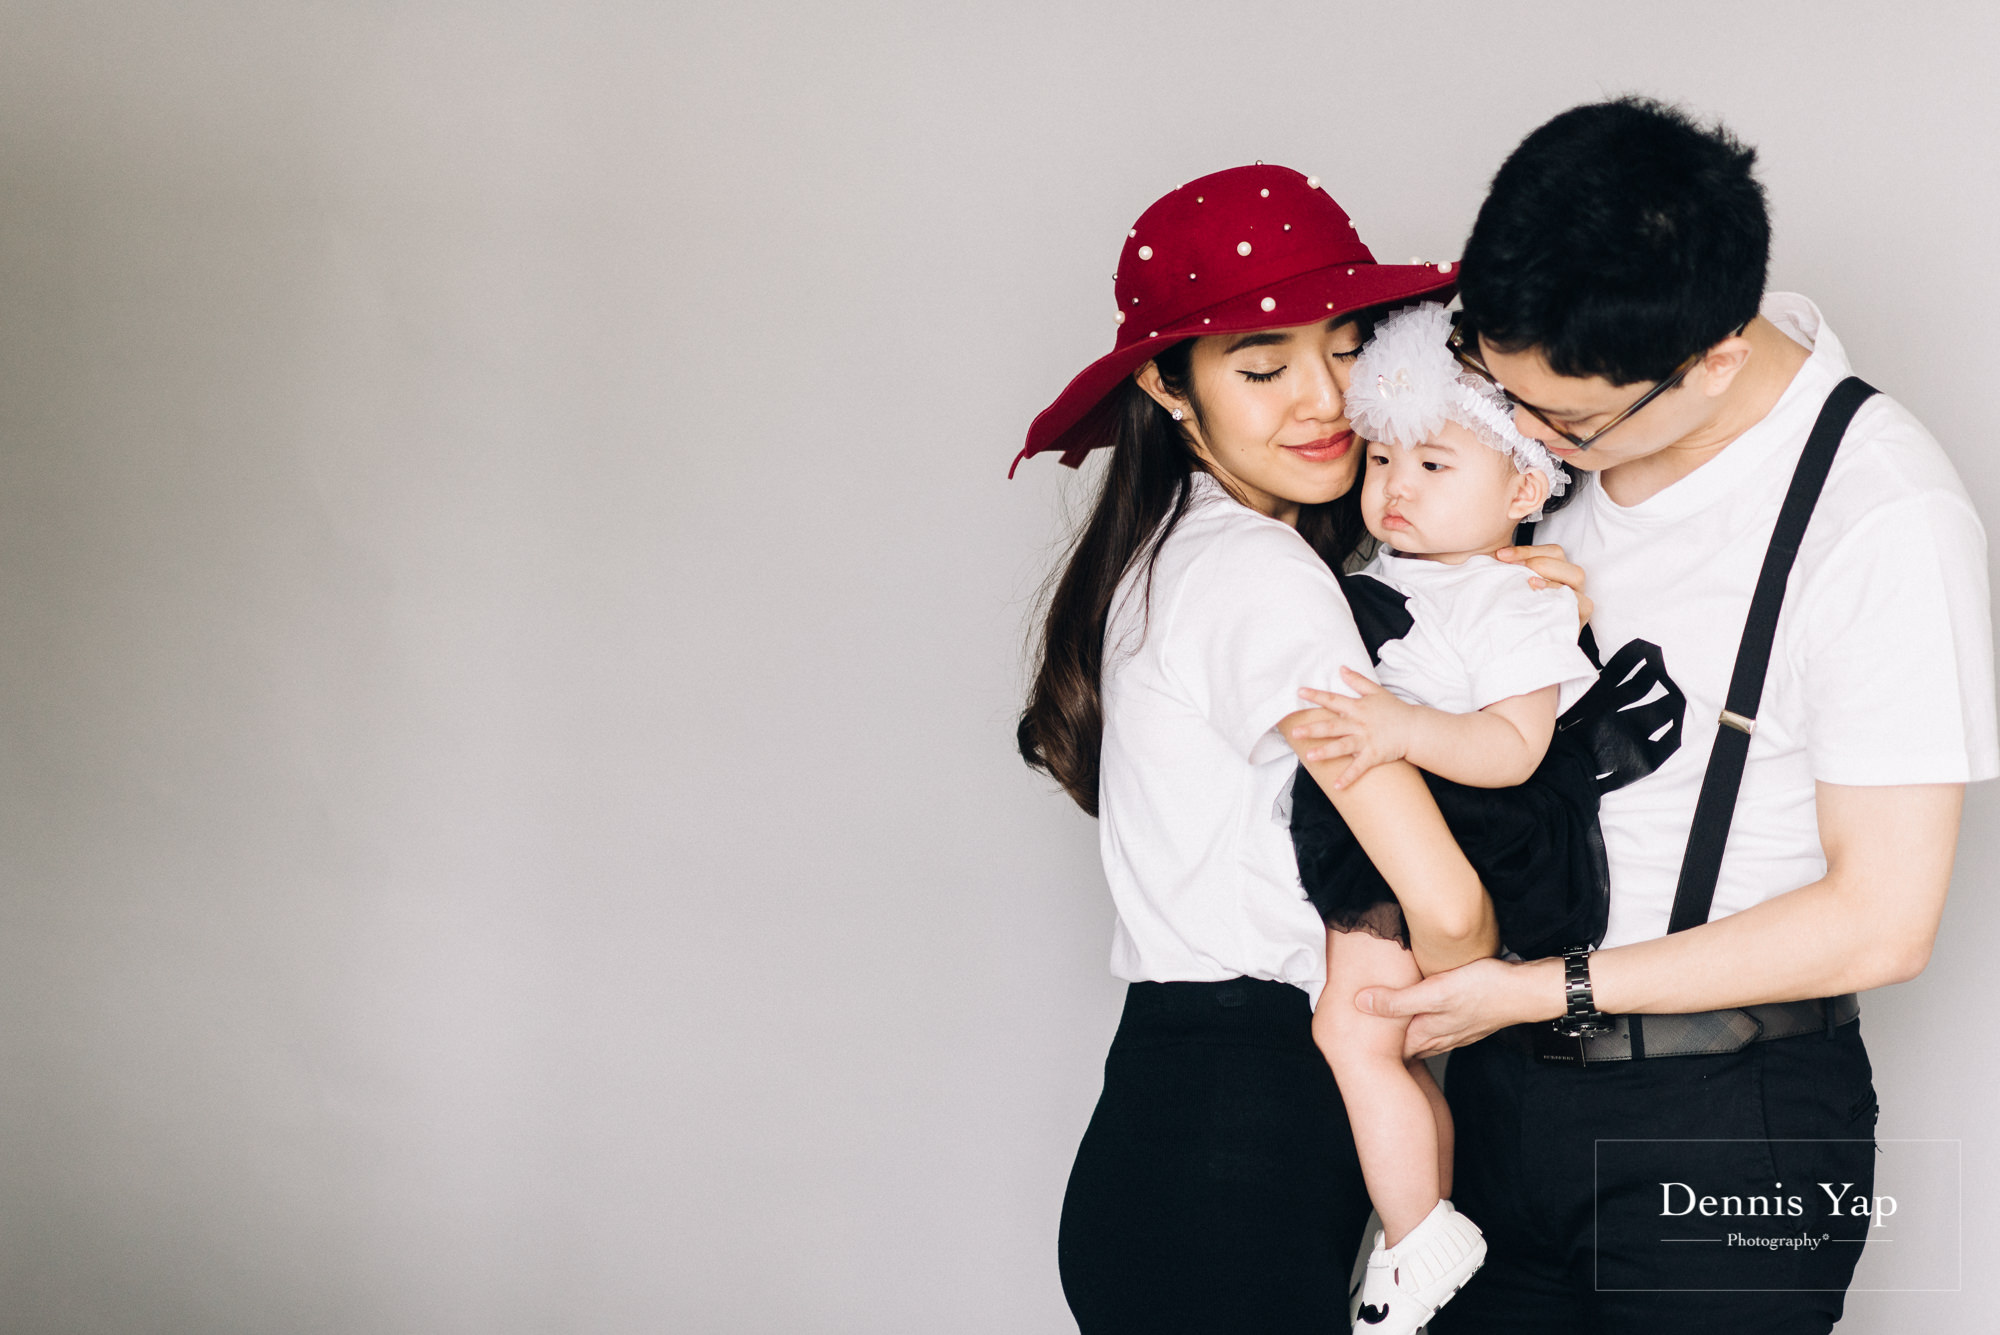 isaac evon family baby portrait funny style dennis yap photography-1.jpg